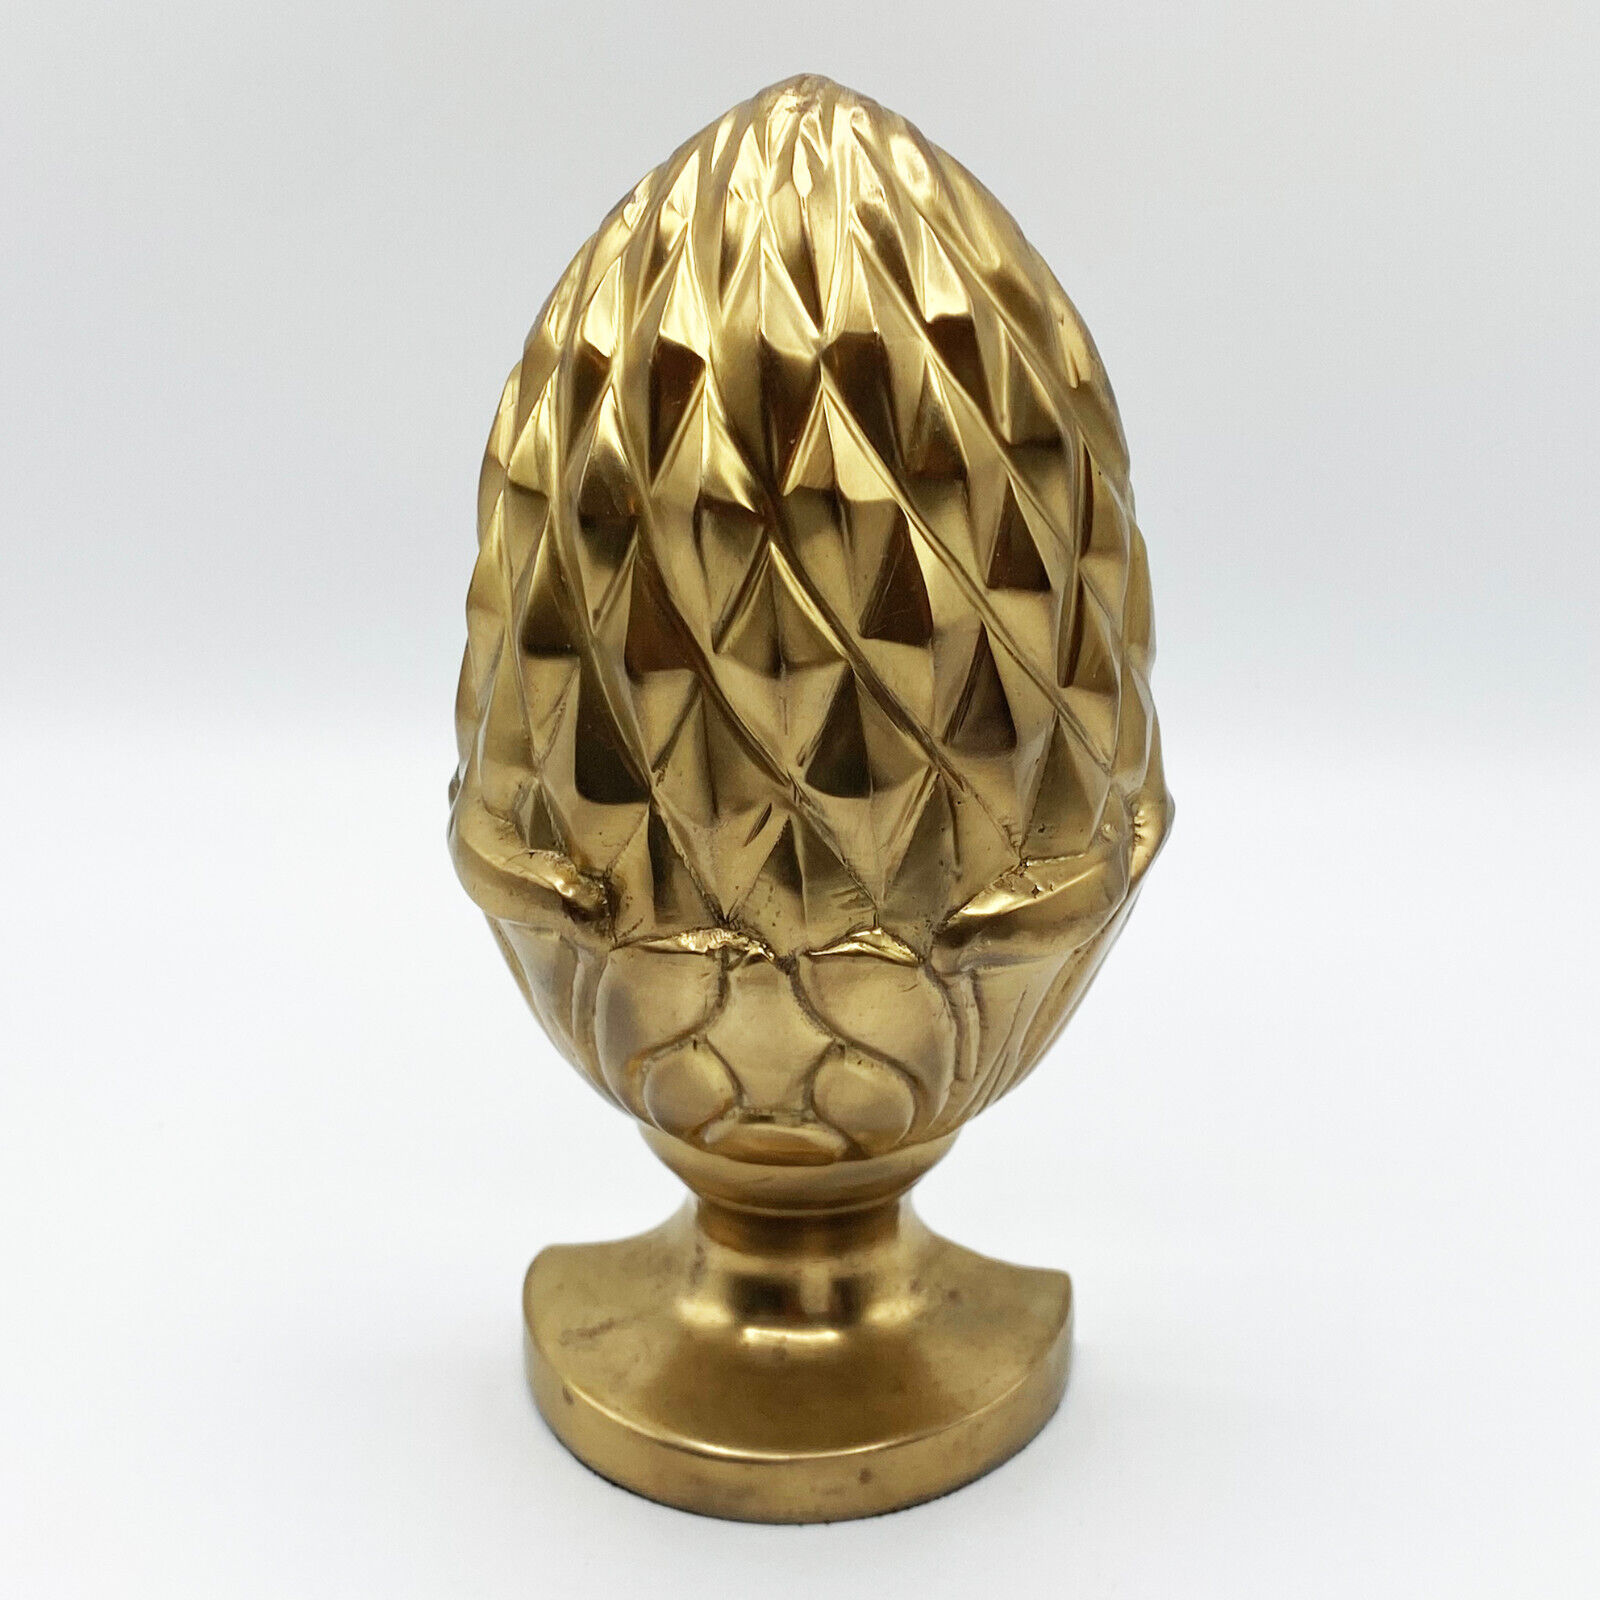 Vintage Pineapple Solid Brass Bookend or Door Stop - Faceted Diamond Pattern